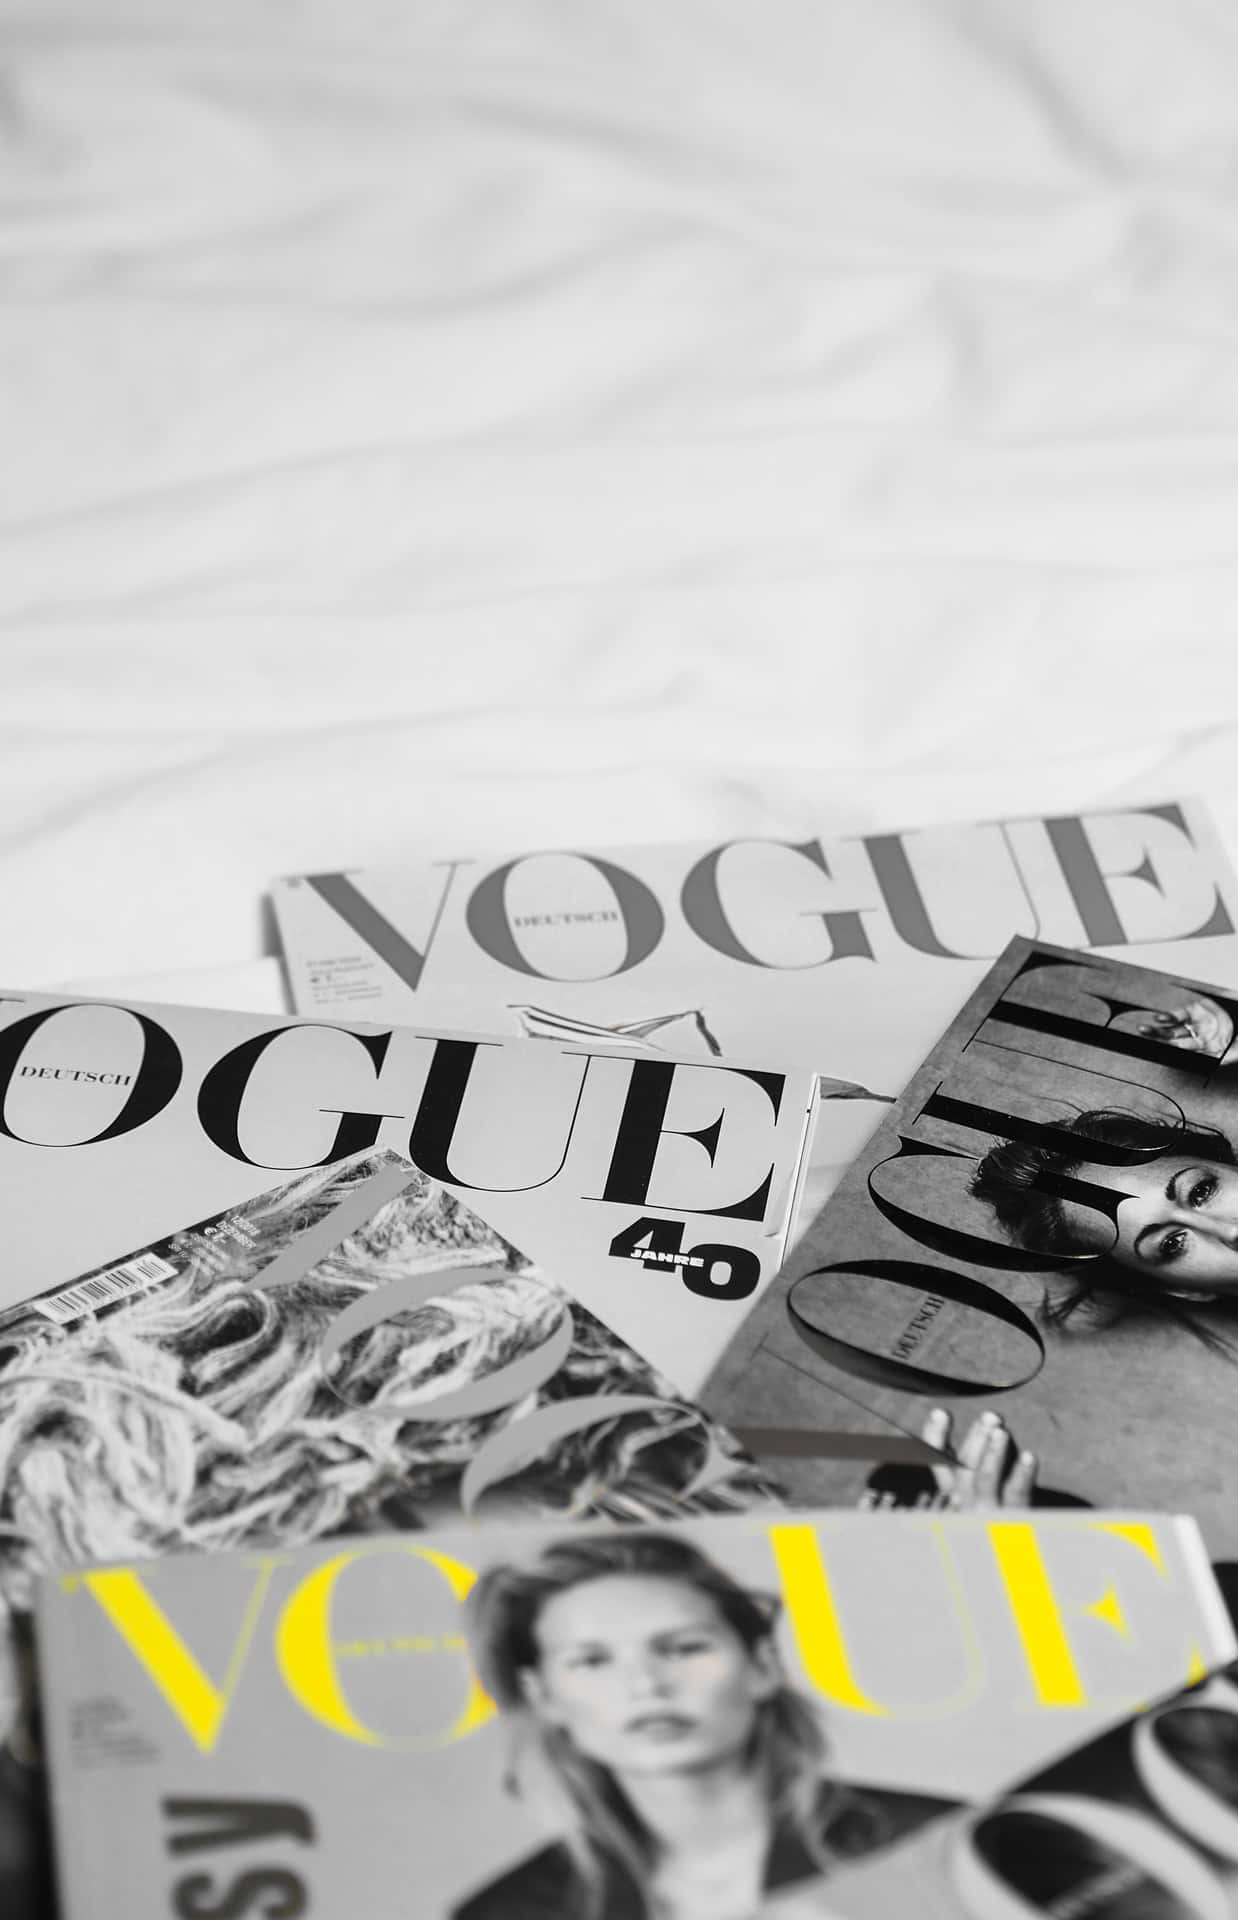 Vogue Magazine On A Bed With A Yellow Cover